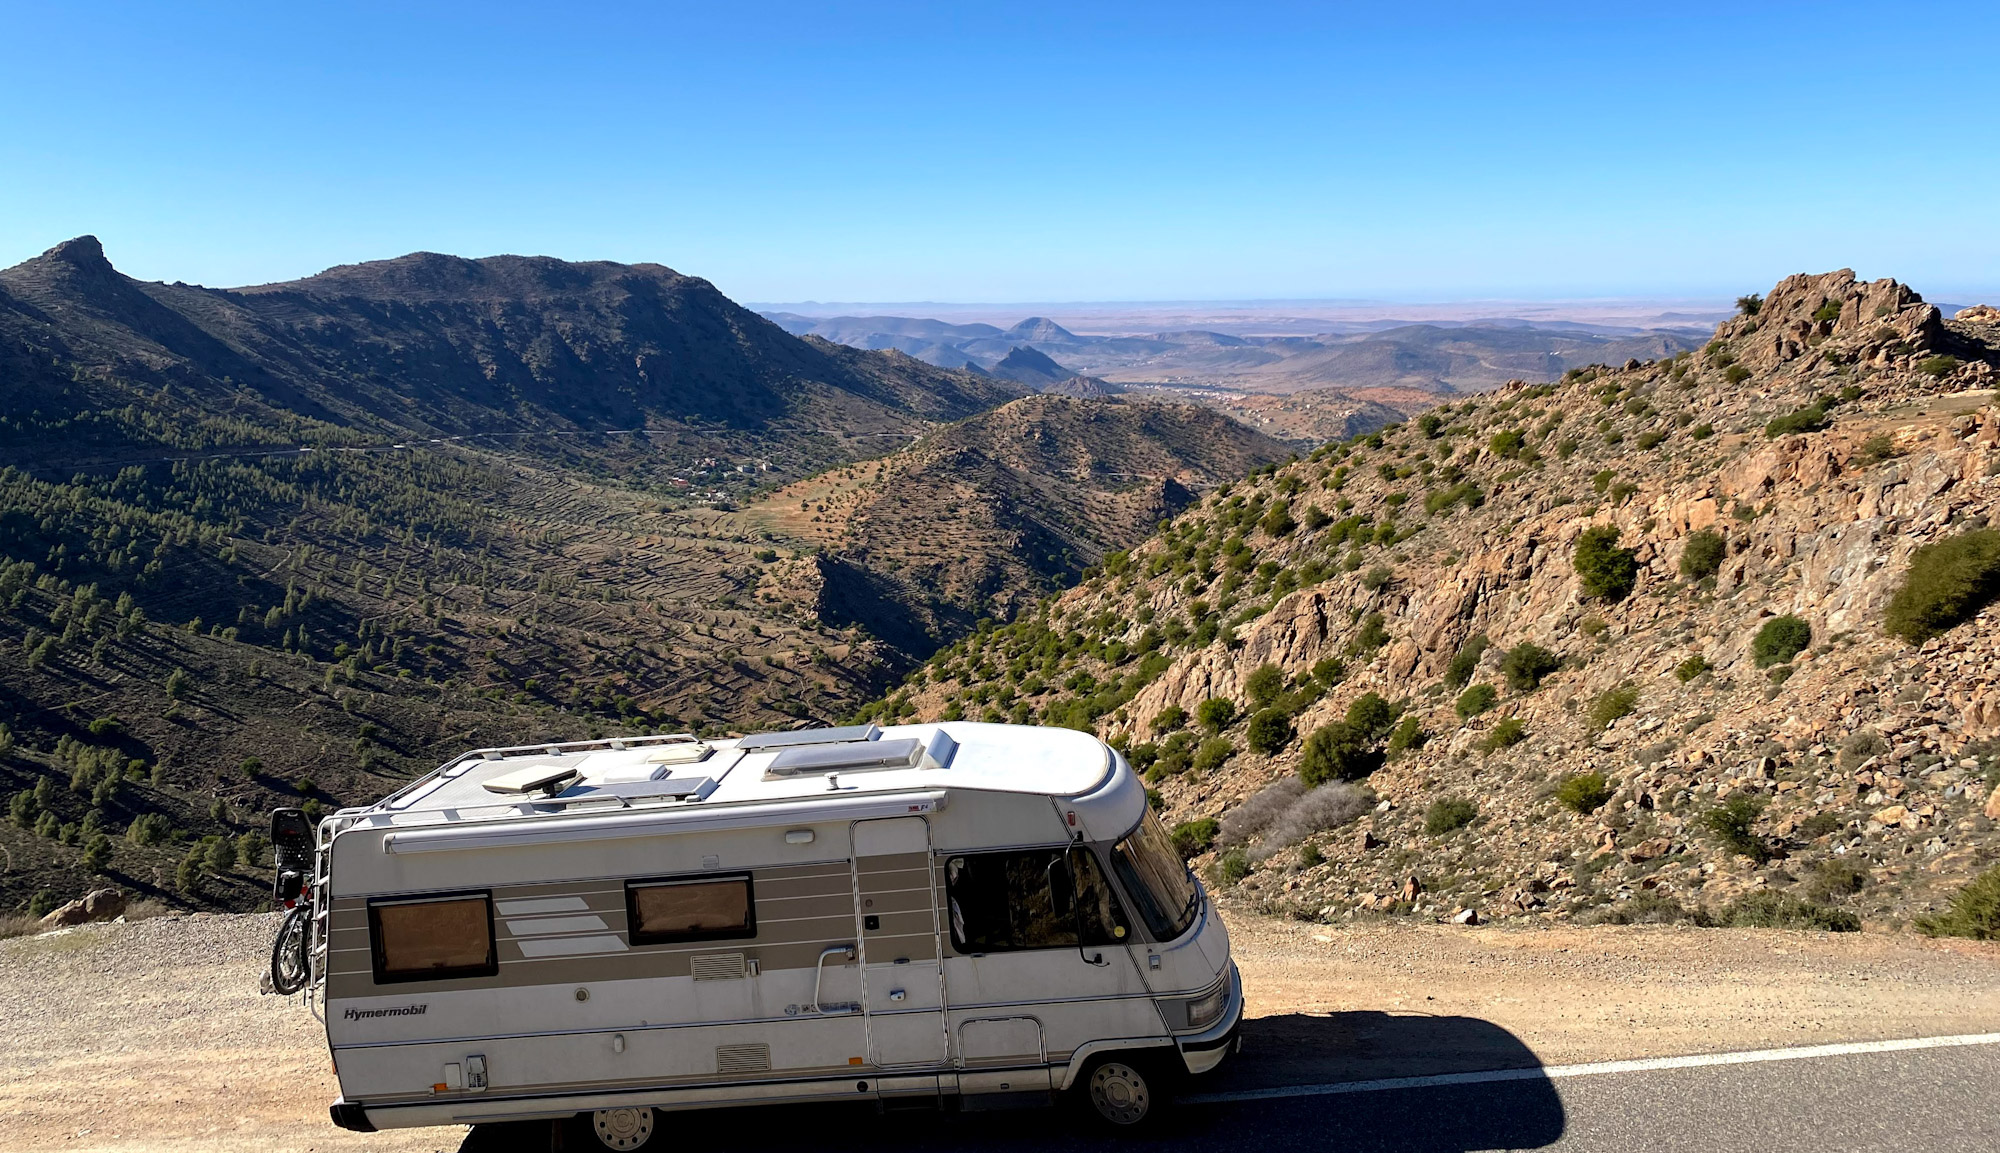 Classic Hymer motorhome high at a viewpoint in the Anti Atlas mountains, Morocco